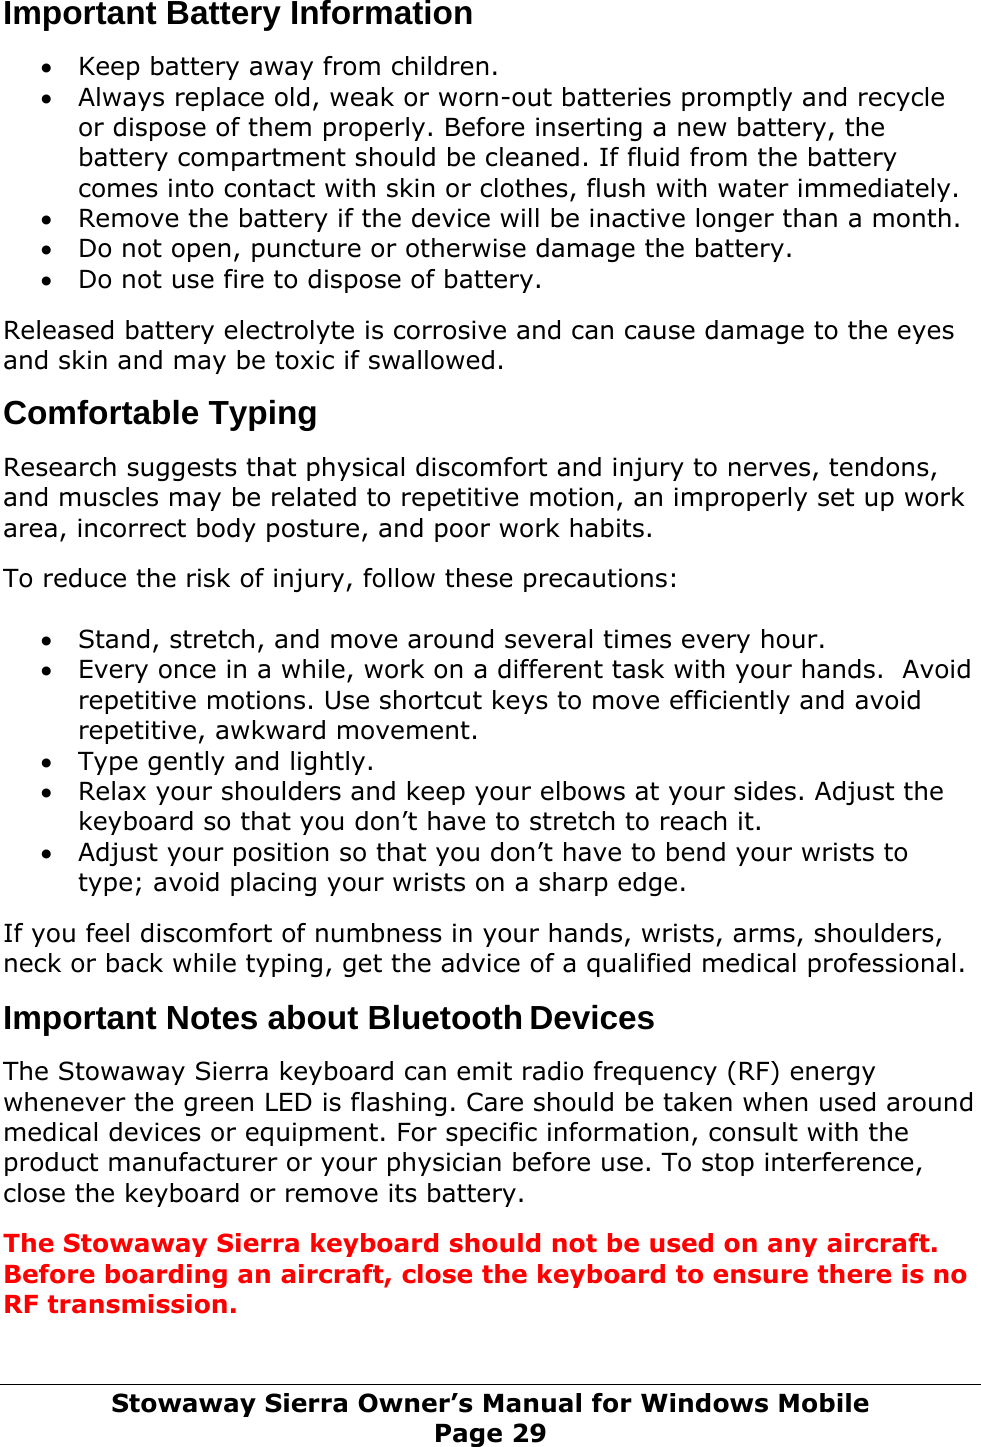 Important Battery Information  • Keep battery away from children. • Always replace old, weak or worn-out batteries promptly and recycle or dispose of them properly. Before inserting a new battery, the battery compartment should be cleaned. If fluid from the battery comes into contact with skin or clothes, flush with water immediately. • Remove the battery if the device will be inactive longer than a month. • Do not open, puncture or otherwise damage the battery. • Do not use fire to dispose of battery.  Released battery electrolyte is corrosive and can cause damage to the eyes and skin and may be toxic if swallowed.  Comfortable Typing  Research suggests that physical discomfort and injury to nerves, tendons, and muscles may be related to repetitive motion, an improperly set up work area, incorrect body posture, and poor work habits.  To reduce the risk of injury, follow these precautions:  • Stand, stretch, and move around several times every hour. • Every once in a while, work on a different task with your hands.  Avoid repetitive motions. Use shortcut keys to move efficiently and avoid repetitive, awkward movement. • Type gently and lightly. • Relax your shoulders and keep your elbows at your sides. Adjust the keyboard so that you don’t have to stretch to reach it. • Adjust your position so that you don’t have to bend your wrists to type; avoid placing your wrists on a sharp edge.  If you feel discomfort of numbness in your hands, wrists, arms, shoulders, neck or back while typing, get the advice of a qualified medical professional.  Important Notes about Bluetooth Devices  The Stowaway Sierra keyboard can emit radio frequency (RF) energy whenever the green LED is flashing. Care should be taken when used around medical devices or equipment. For specific information, consult with the product manufacturer or your physician before use. To stop interference, close the keyboard or remove its battery.  The Stowaway Sierra keyboard should not be used on any aircraft. Before boarding an aircraft, close the keyboard to ensure there is no RF transmission.  Stowaway Sierra Owner’s Manual for Windows Mobile Page 29 